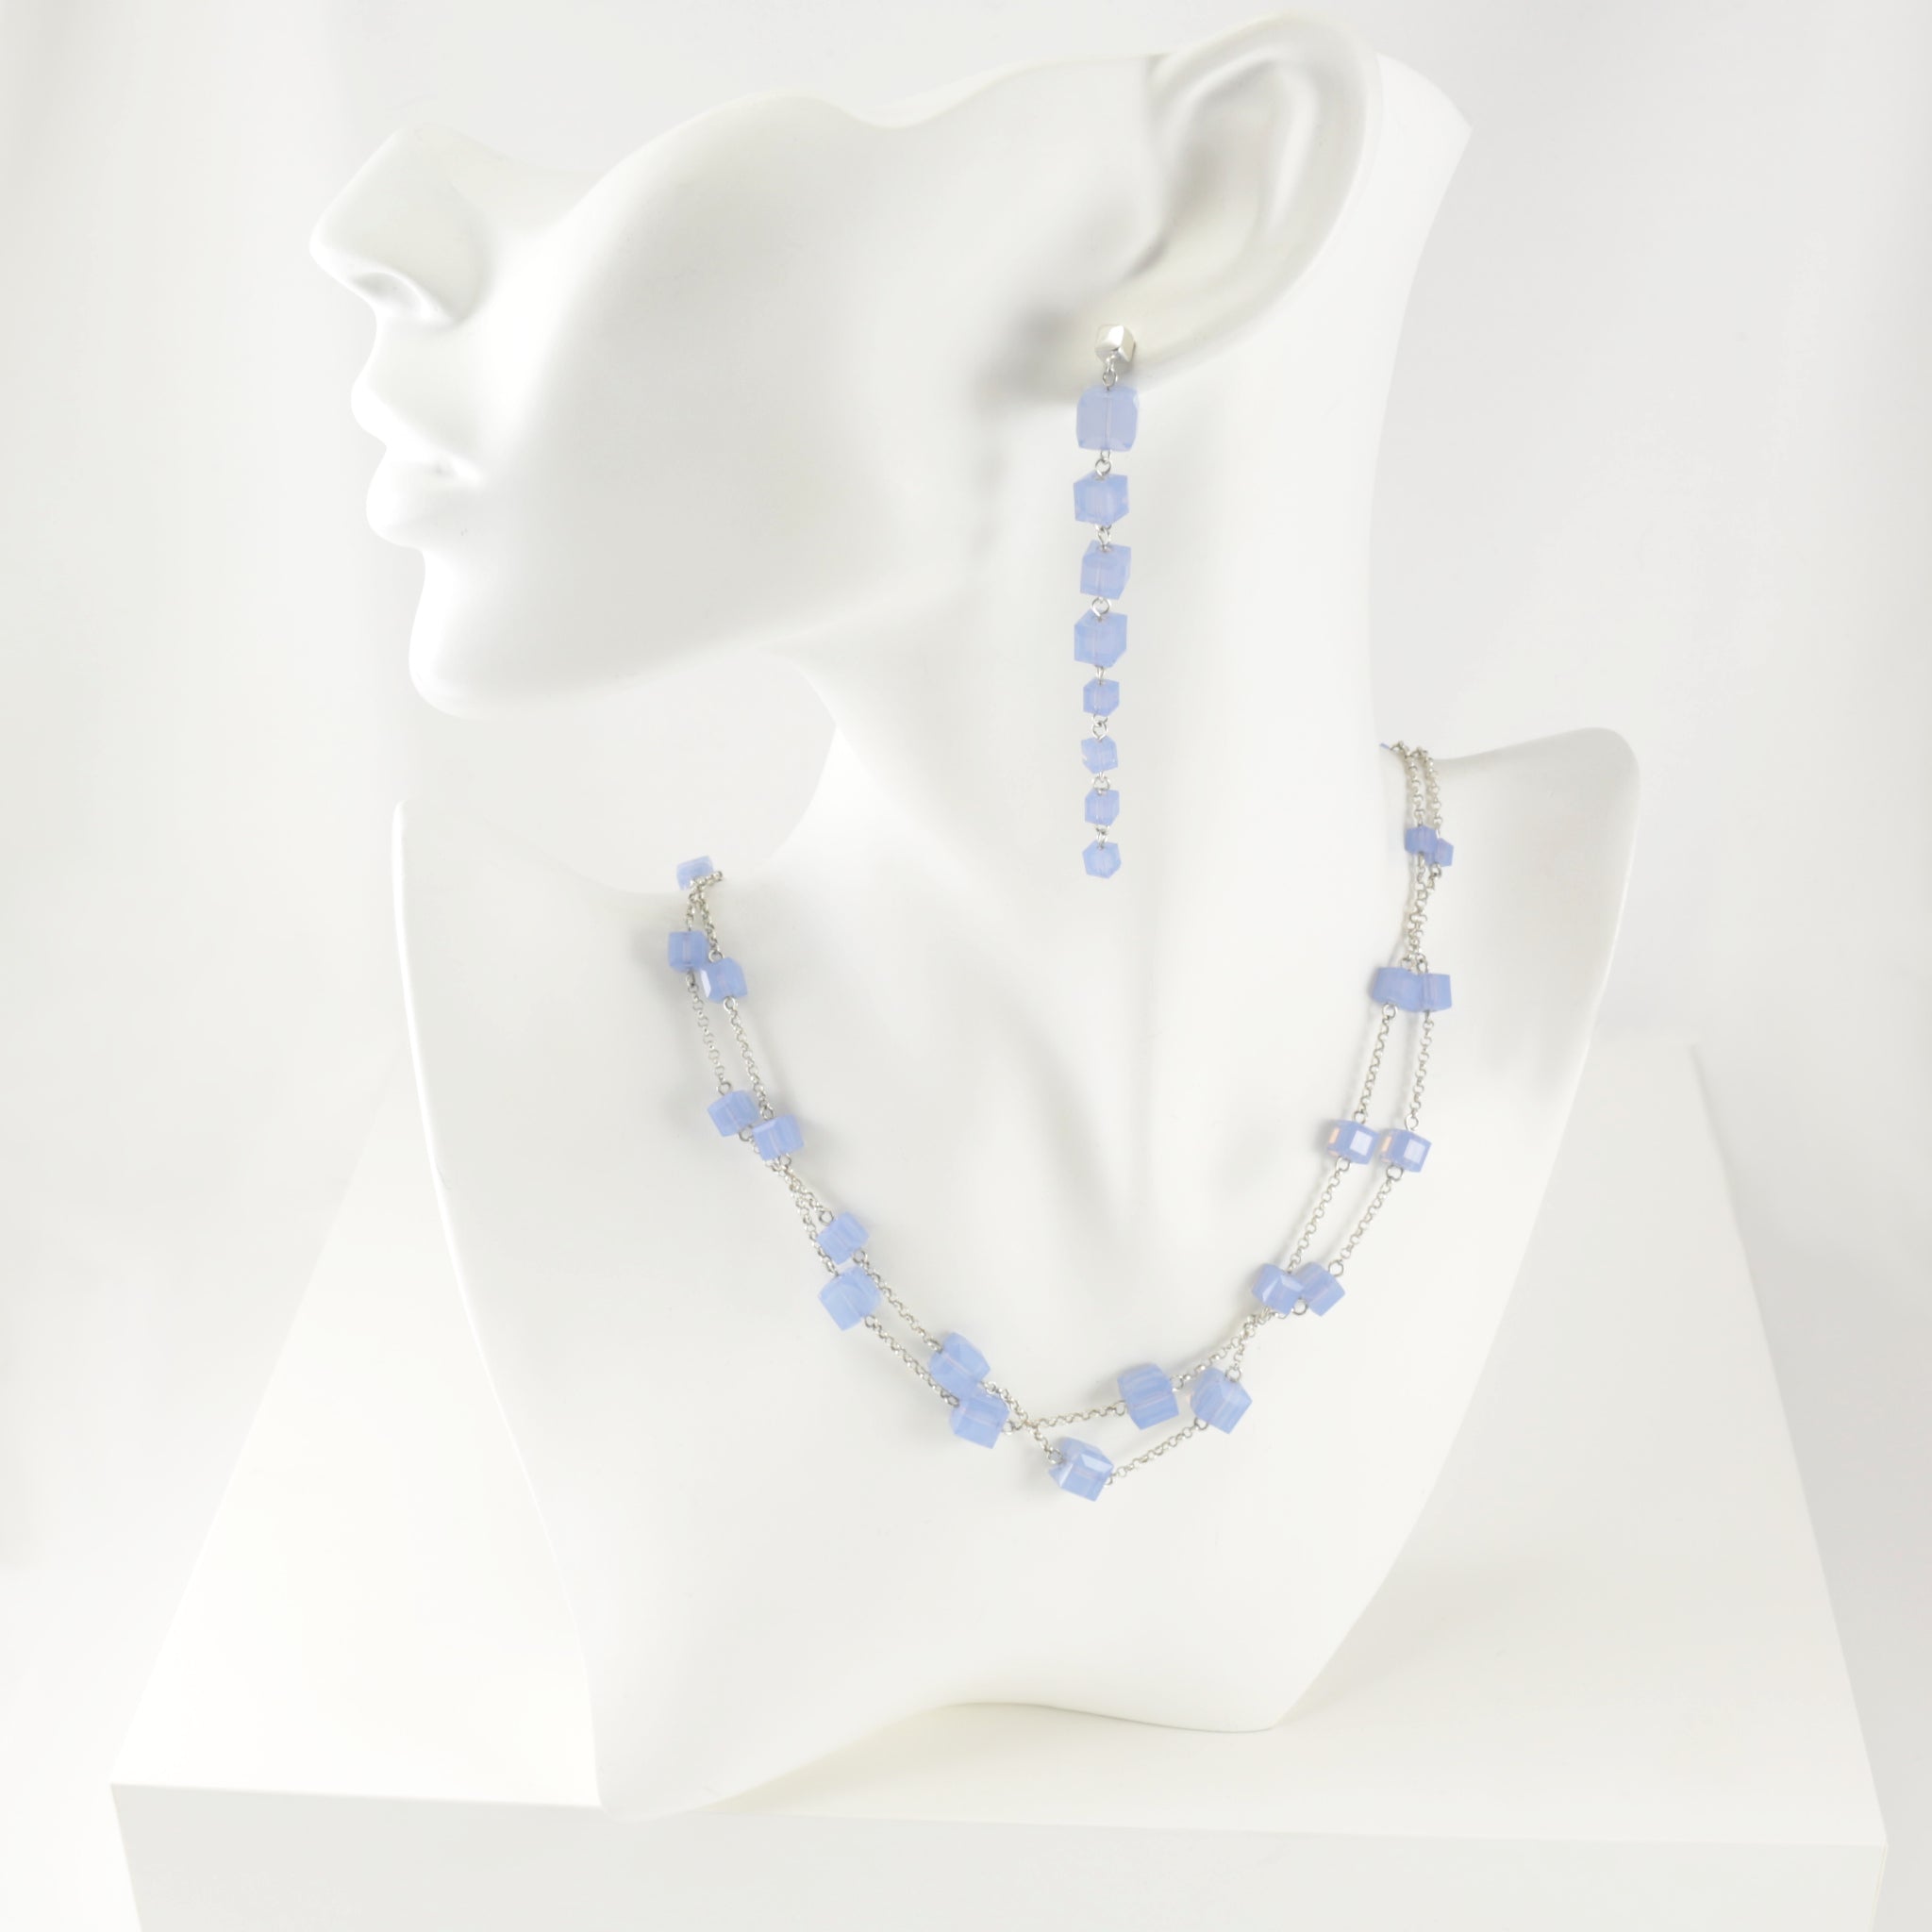 Earrings and necklace set made from sterling silver and Swarovski cube crystals in the color of a powdery, milky, light blue.